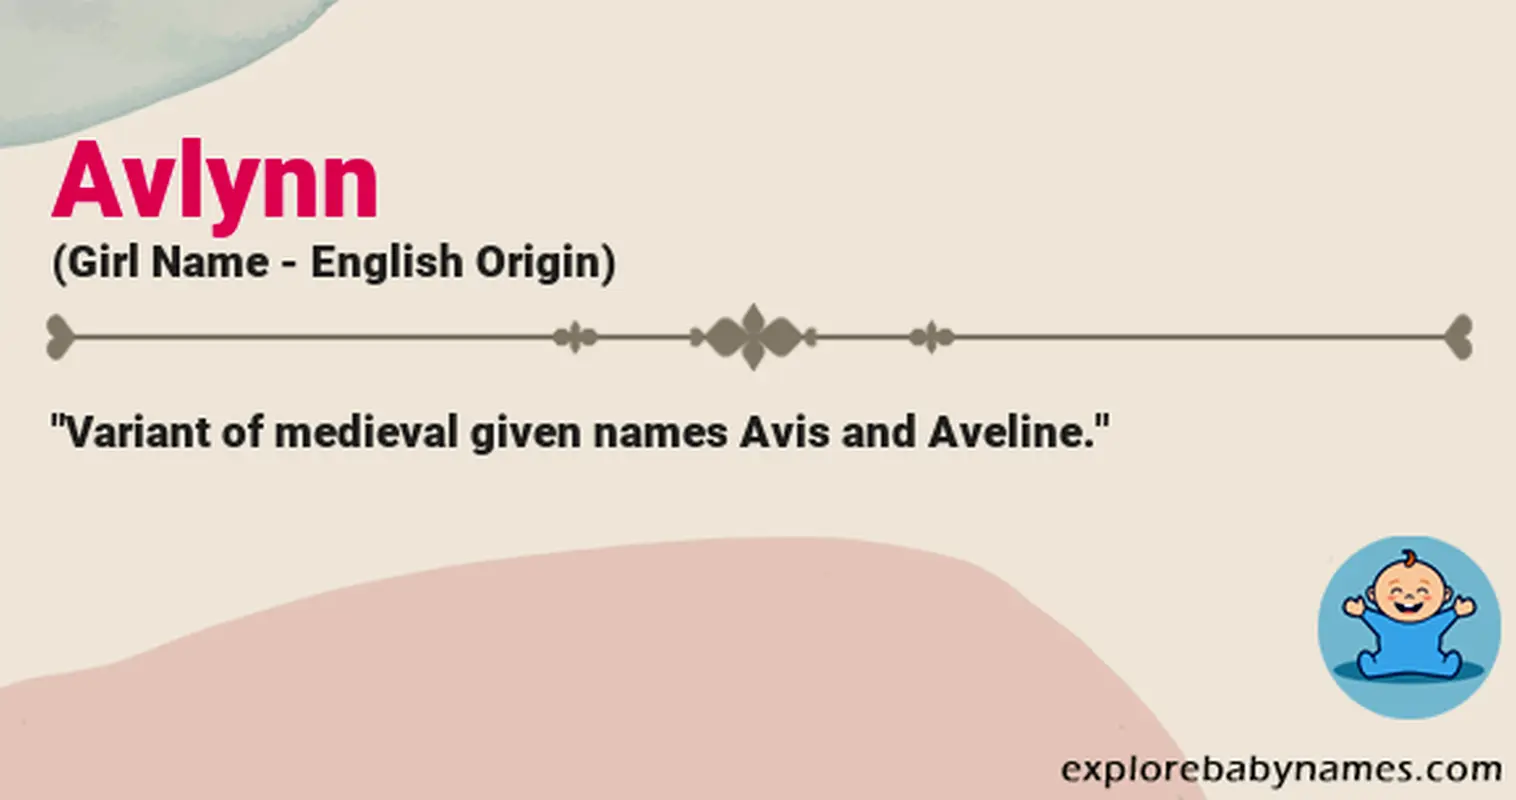 Meaning of Avlynn